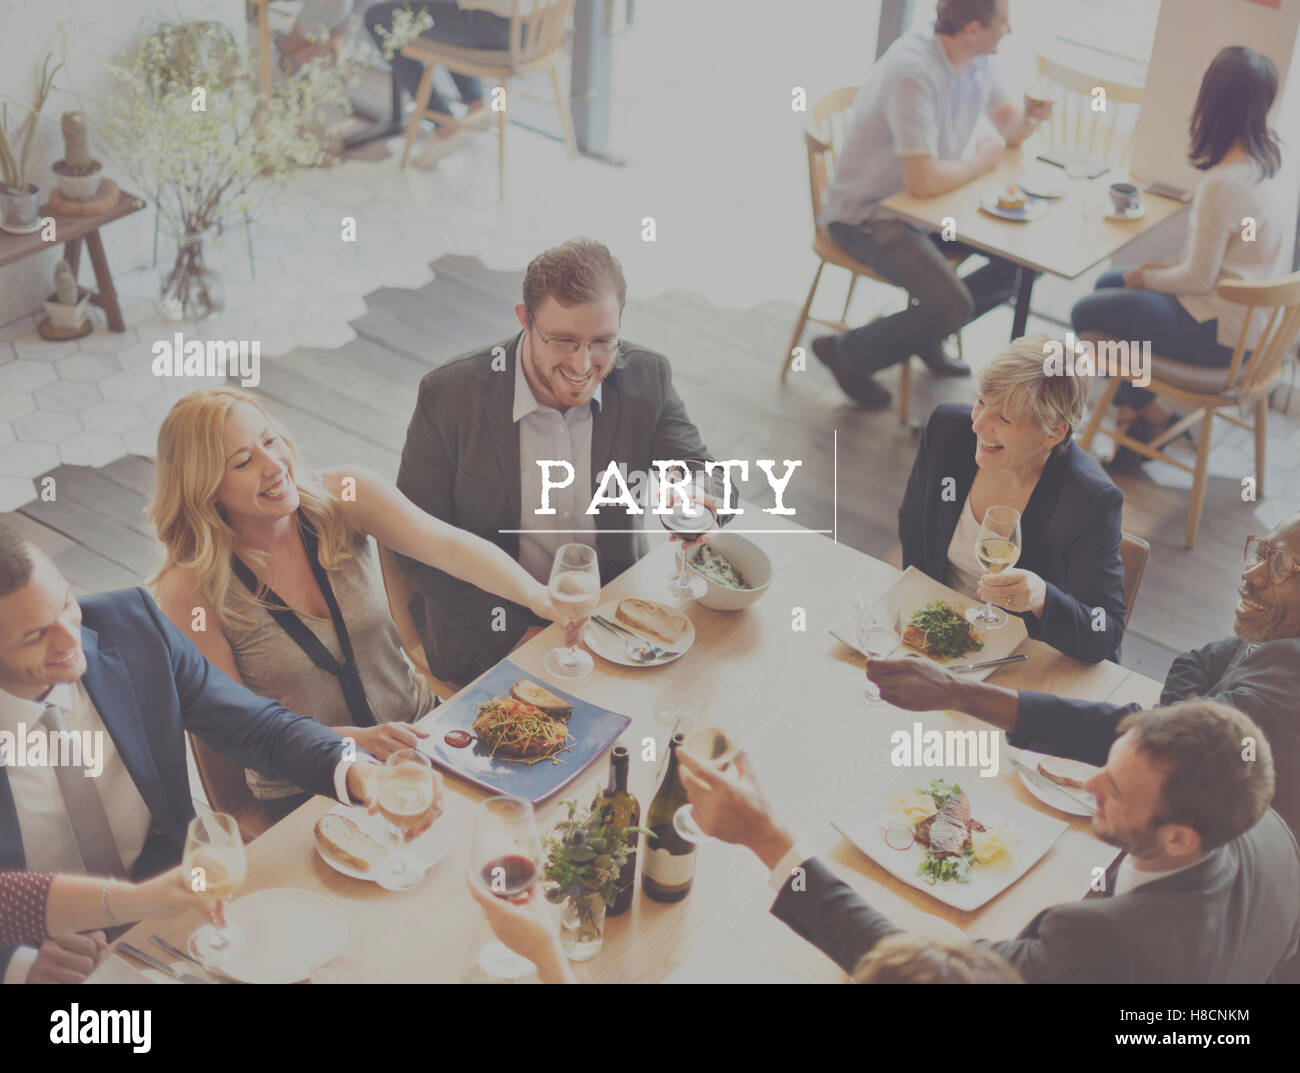 Party Celebrate Enterainment Festival Holiday Concept Stock Photo